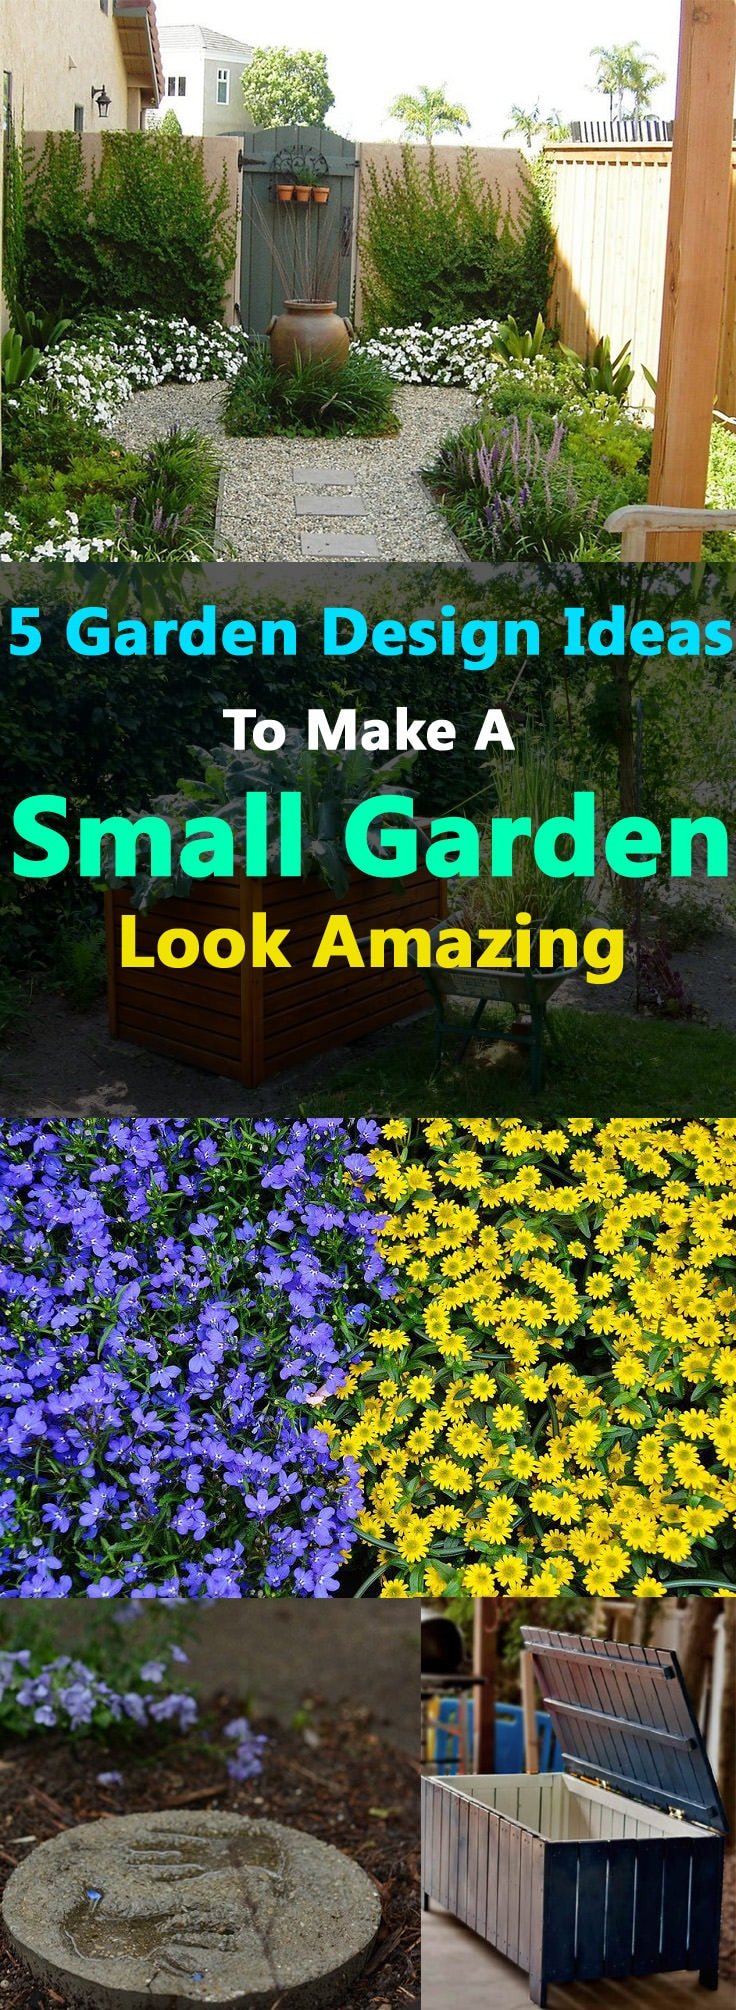 If you have a yard or garden that is small and there is a problem of lack of space, must see our 5 garden design ideas that can make a small garden look amazing and bigger.